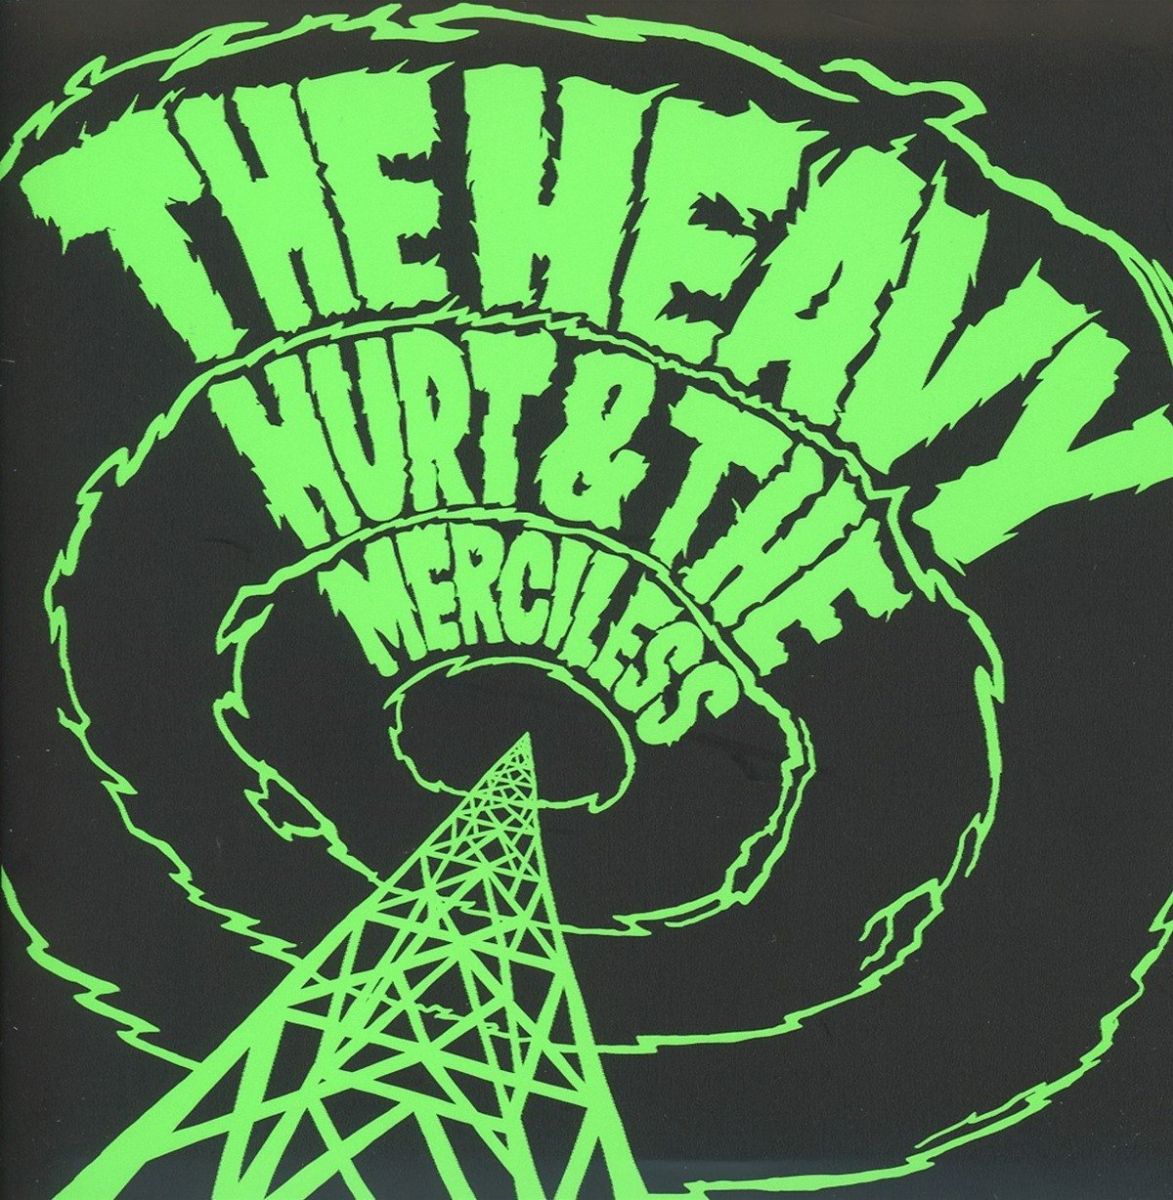 Hurt And The Merciless